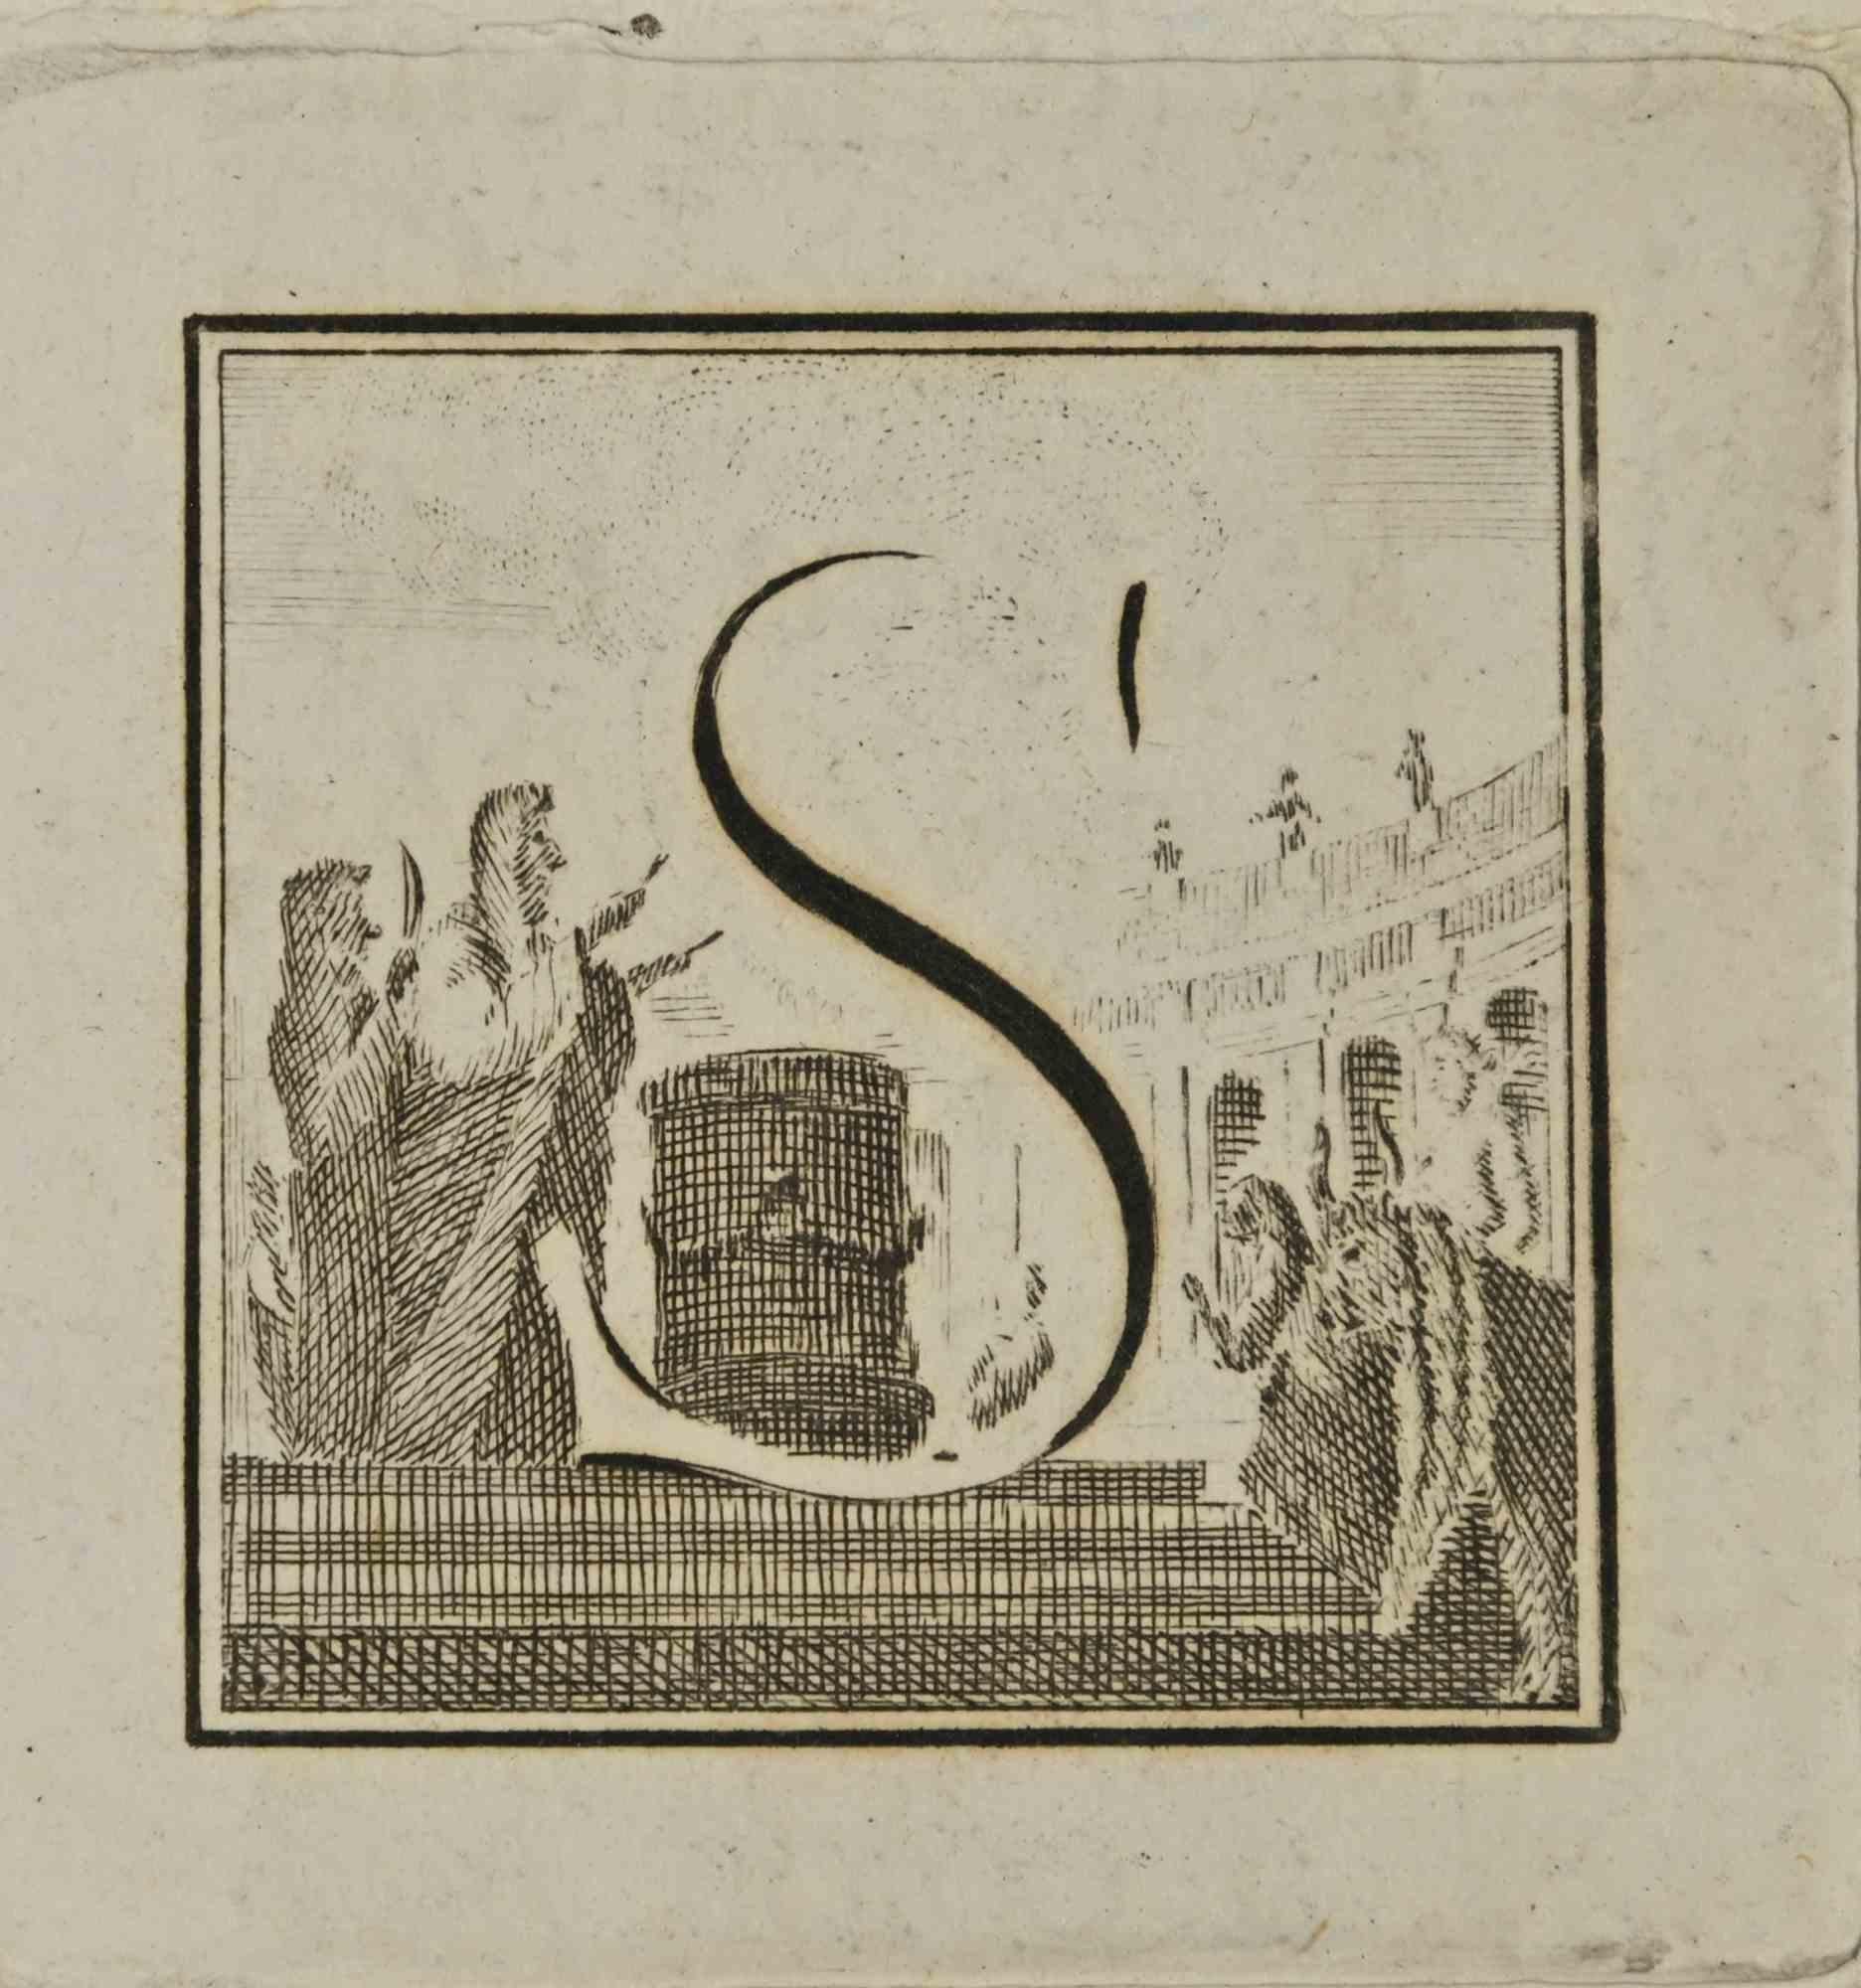 Letter of the Alphabet S,  from the series "Antiquities of Herculaneum", is an etching on paper realized by Luigi Vanvitelli in the 18th century.

Good conditions.

The etching belongs to the print suite “Antiquities of Herculaneum Exposed”